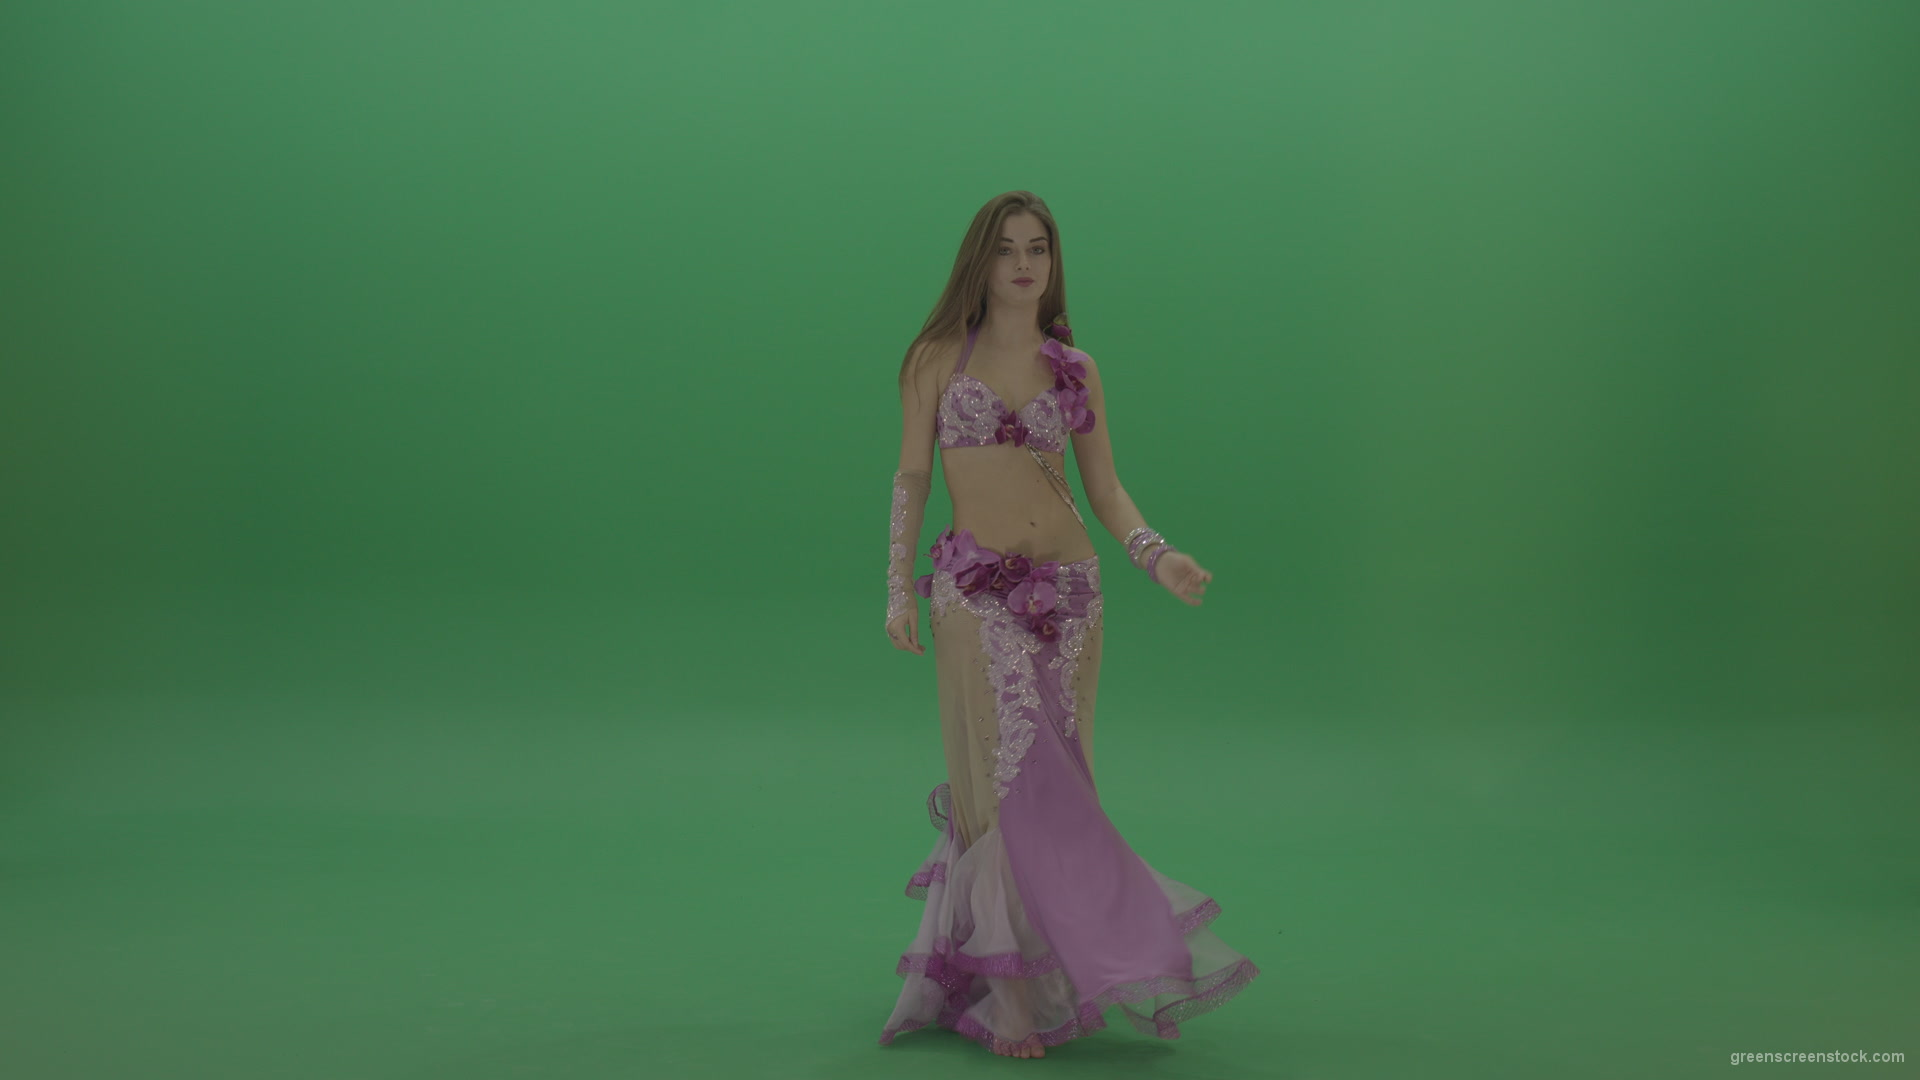 Delightful-belly-dancer-in-pink-wear-display-amazing-dance-moves-over-chromakey-background_004 Green Screen Stock